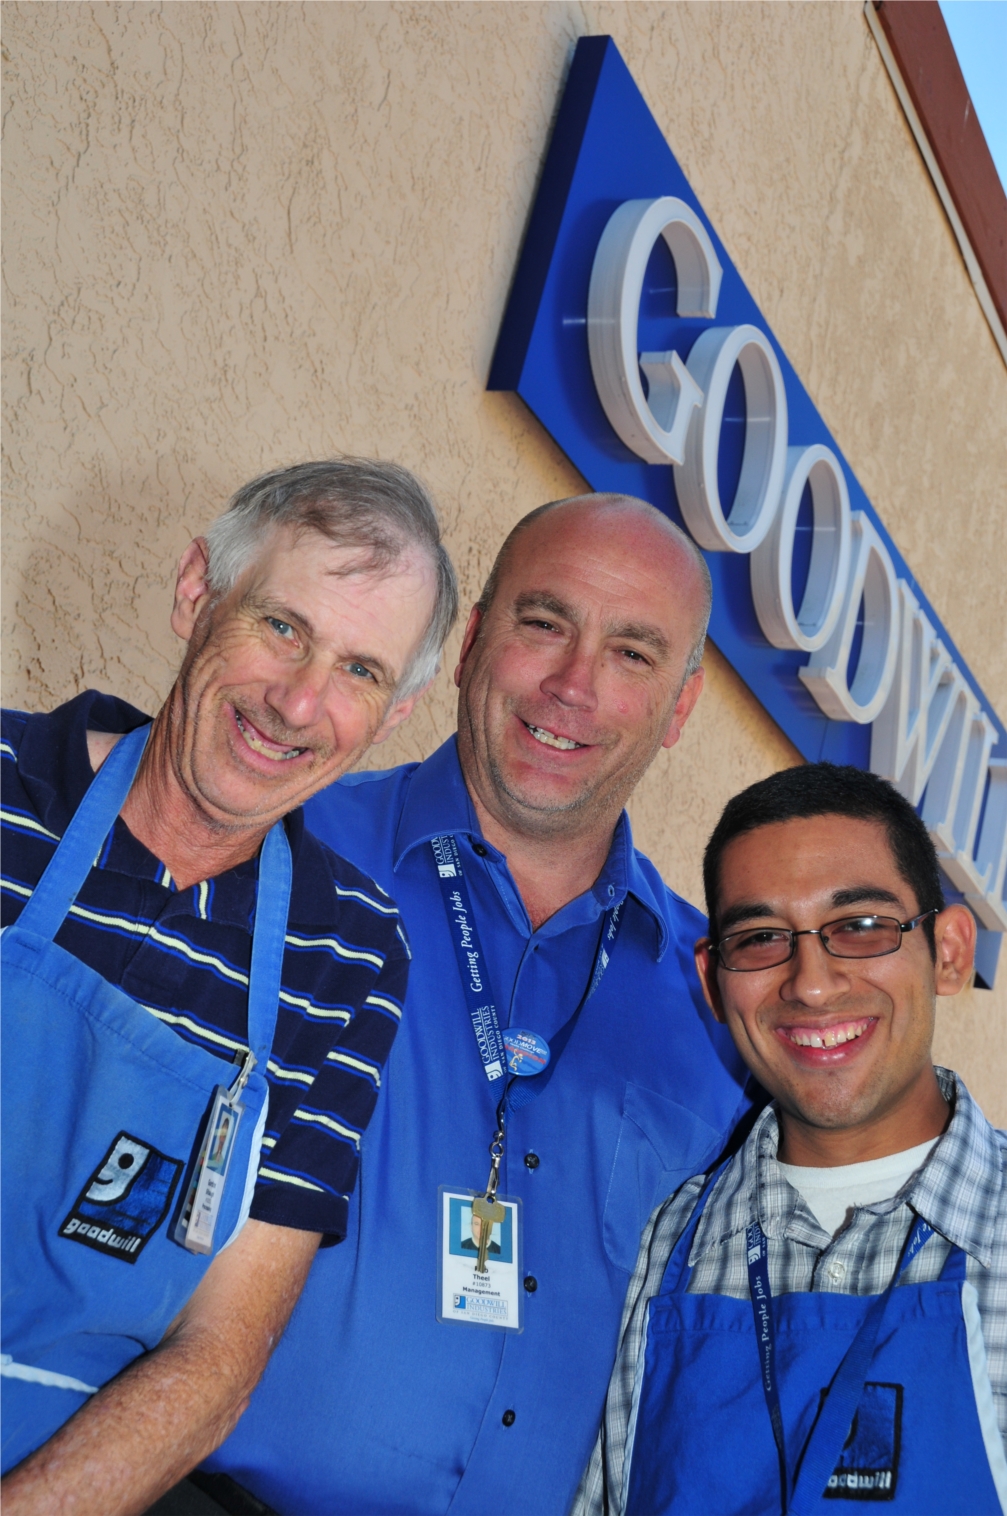 Goodwill creates jobs for people with varying levels of abilities, and helps them gain the confidence and skills needed to move towards independence and a brighter future. 